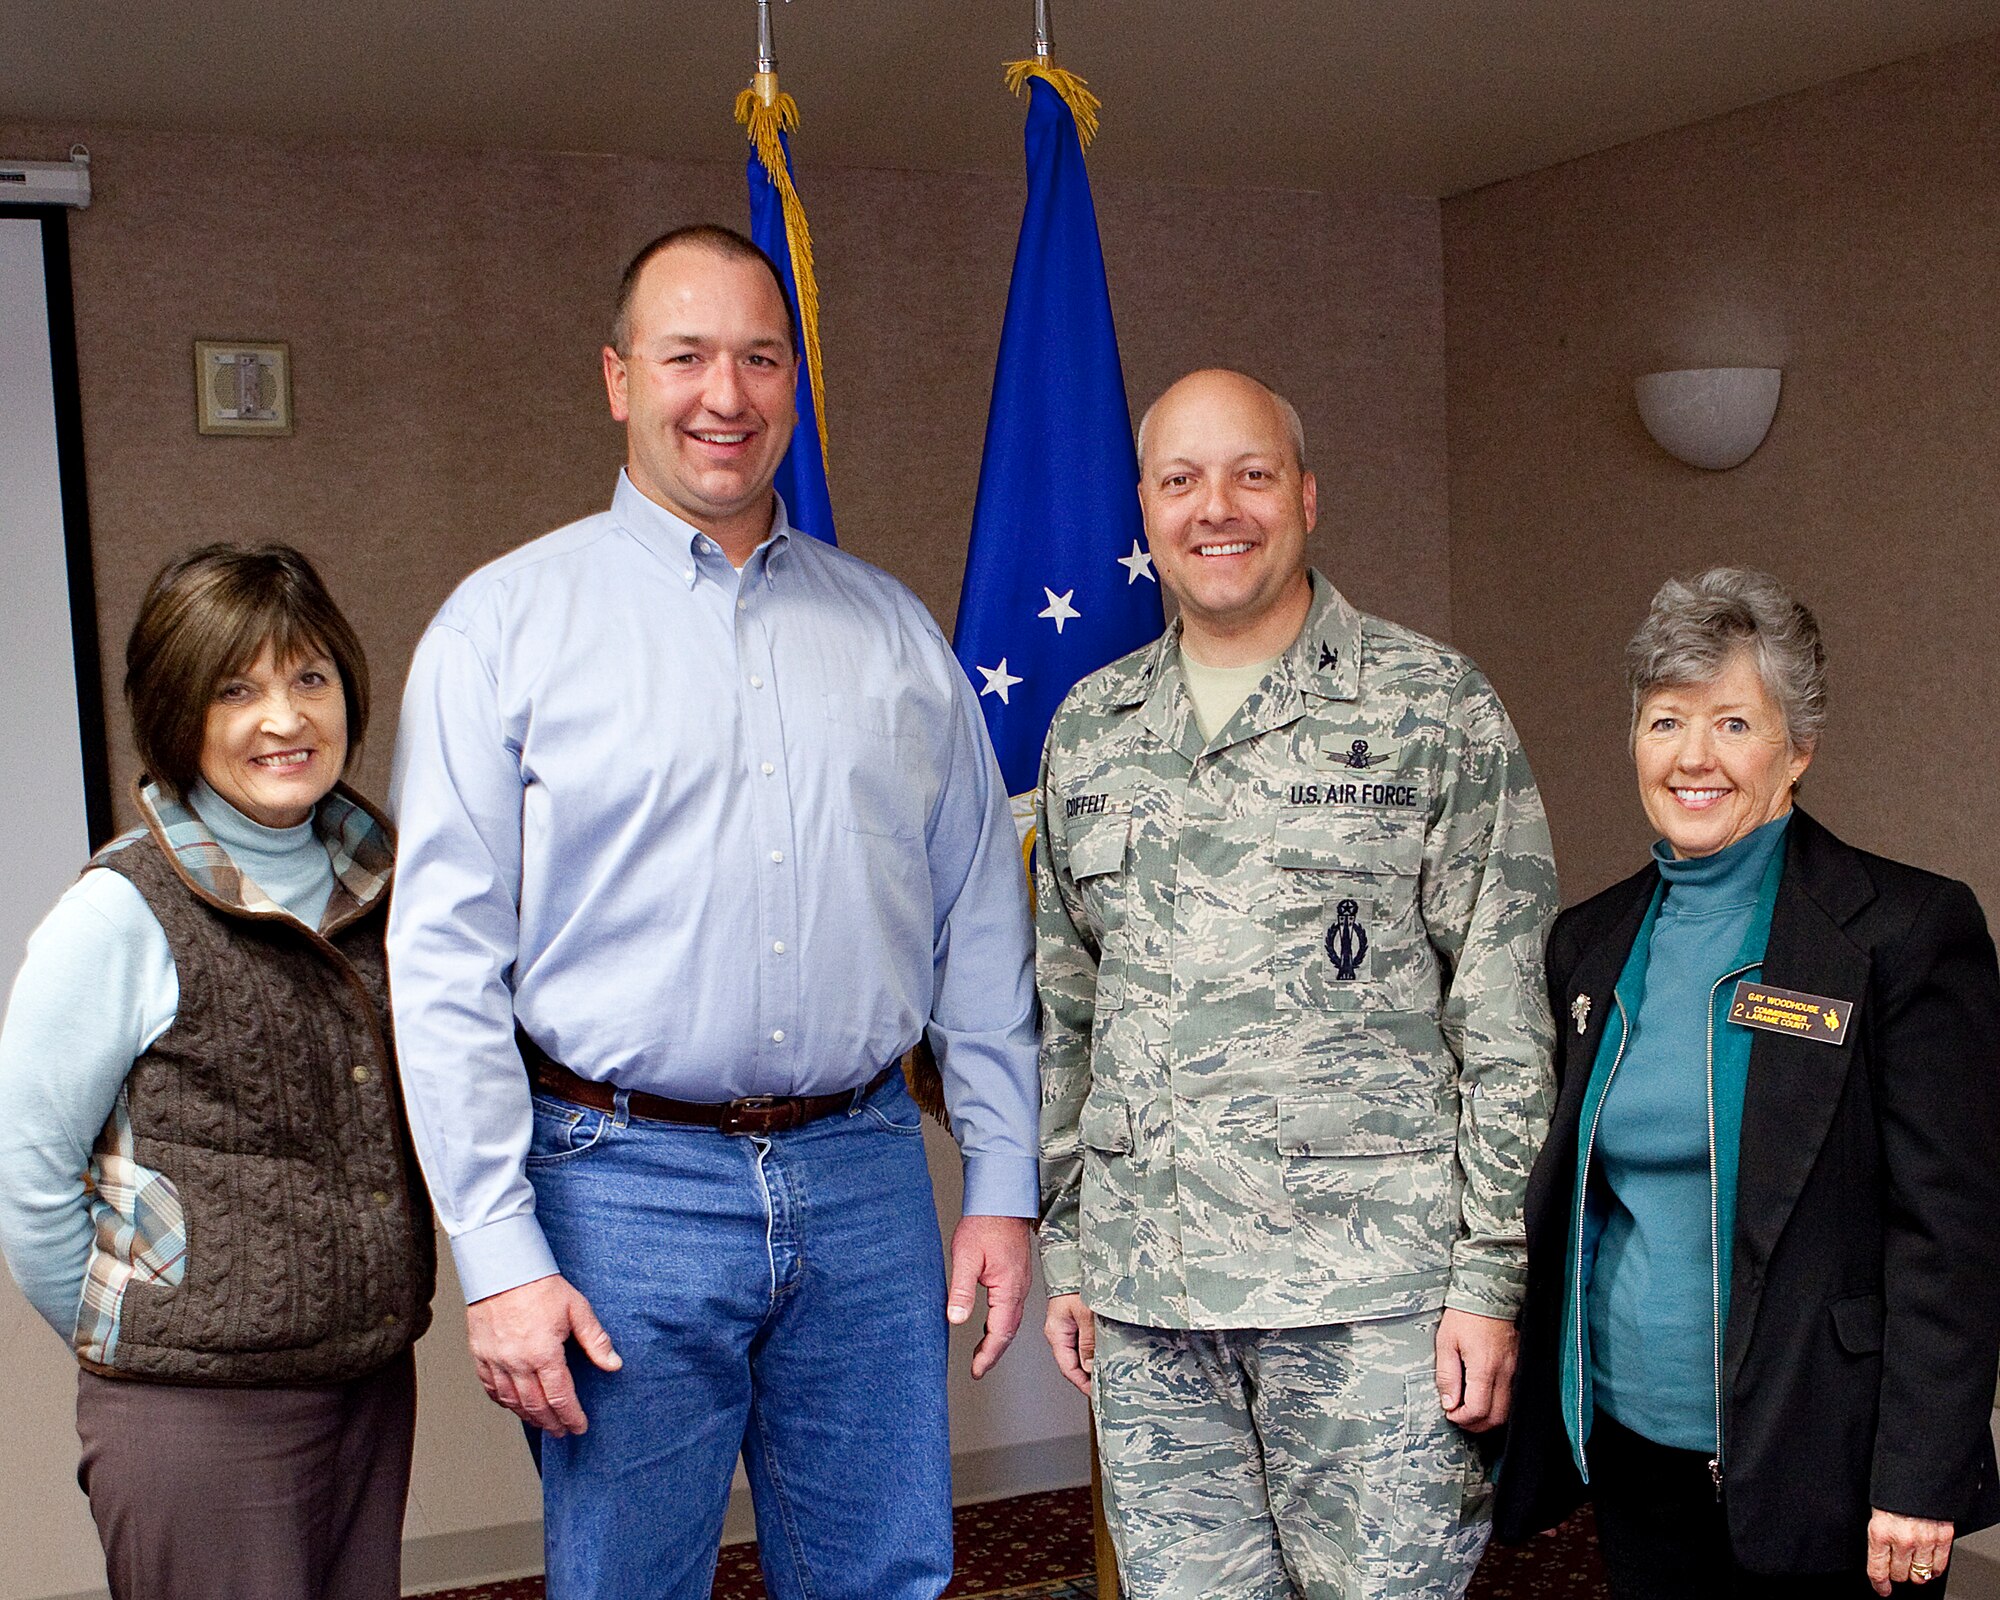 Col. Christopher “Boots” Coffelt, 90th Missile Wing commander, poses for a photograph with Laramie County Commissioners, Diane Humphrey, Dr. Troy Thompson and Gay Woodhouse, during the Laramie County Commissioners visit to F. E. Warren Air Force Base, Wyo., Oct. 25. (U.S. Air Force photo by Matt Bilden)